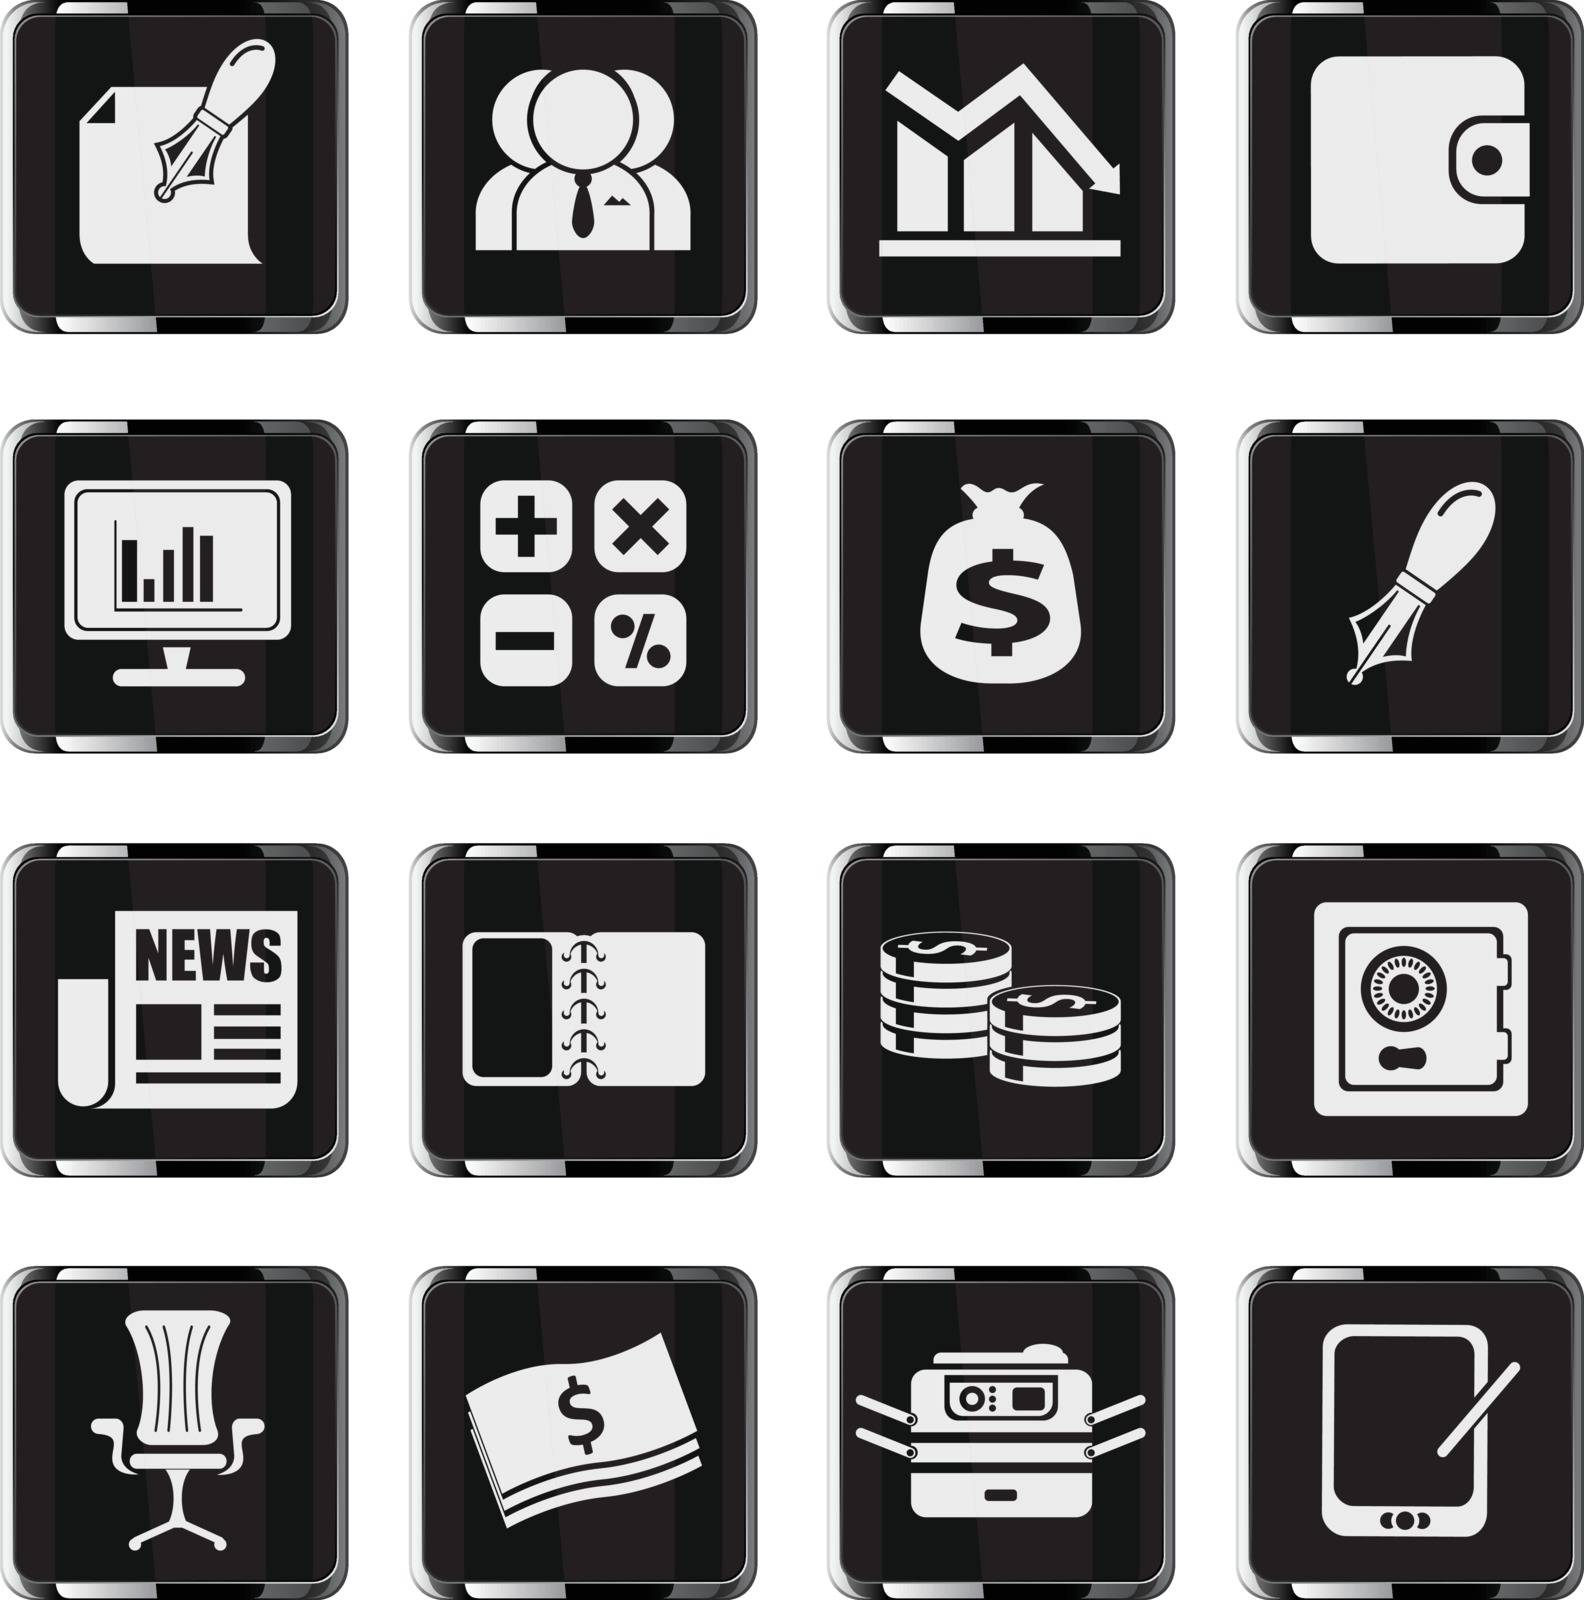 Business and Finance Web Icons . simply symbol for web icons